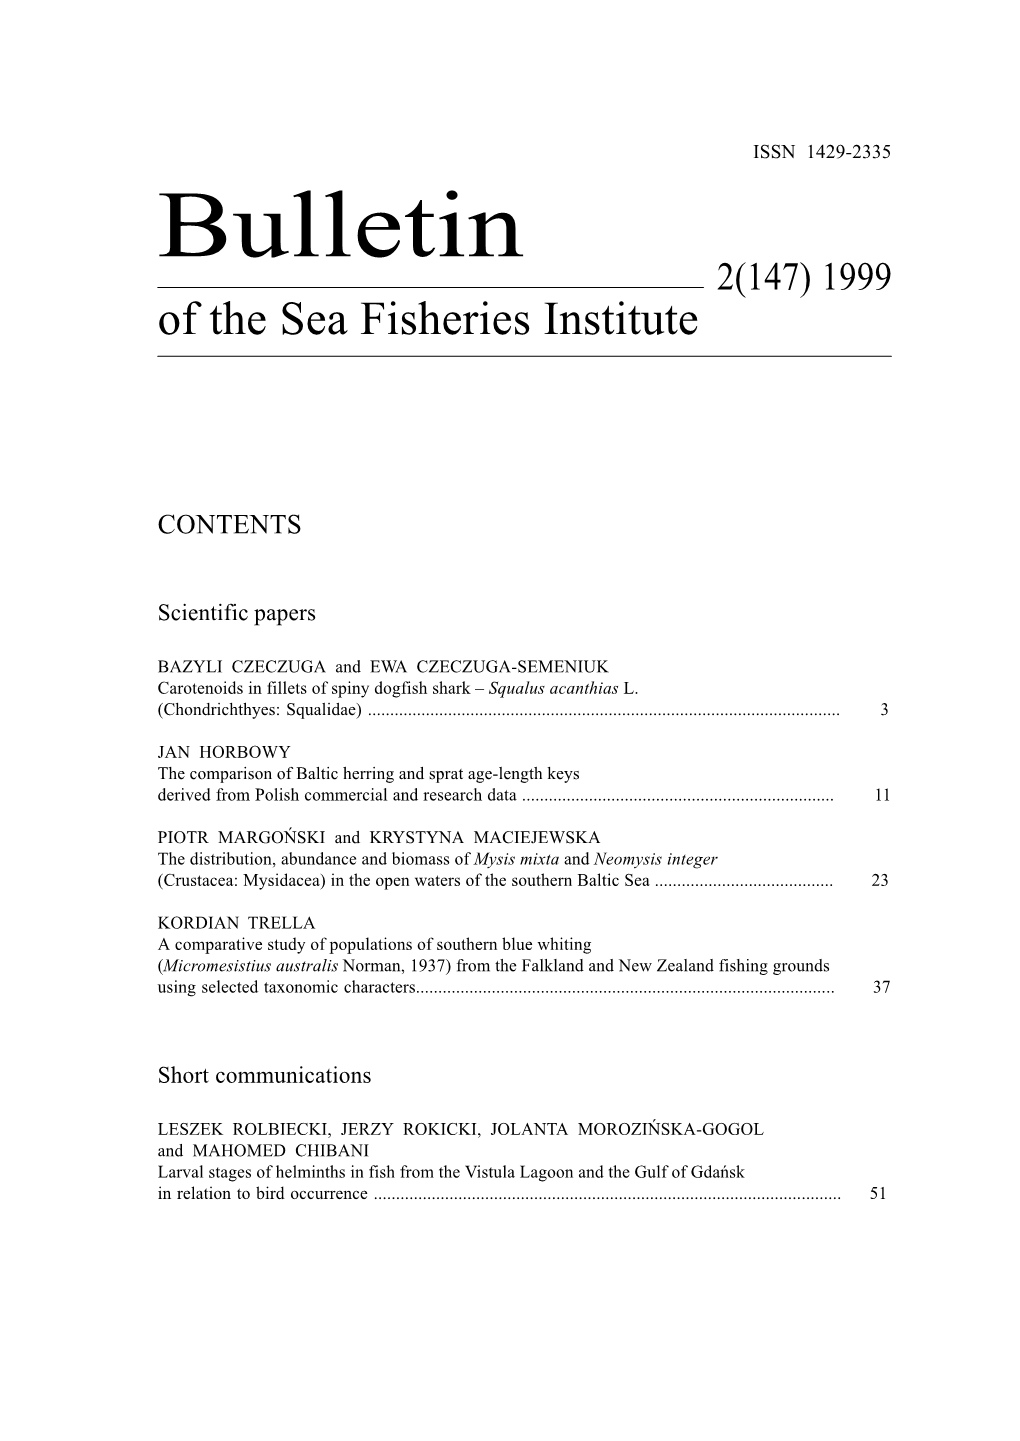 Bulletin of the Sea Fisheries Institute 2 (147) 1999